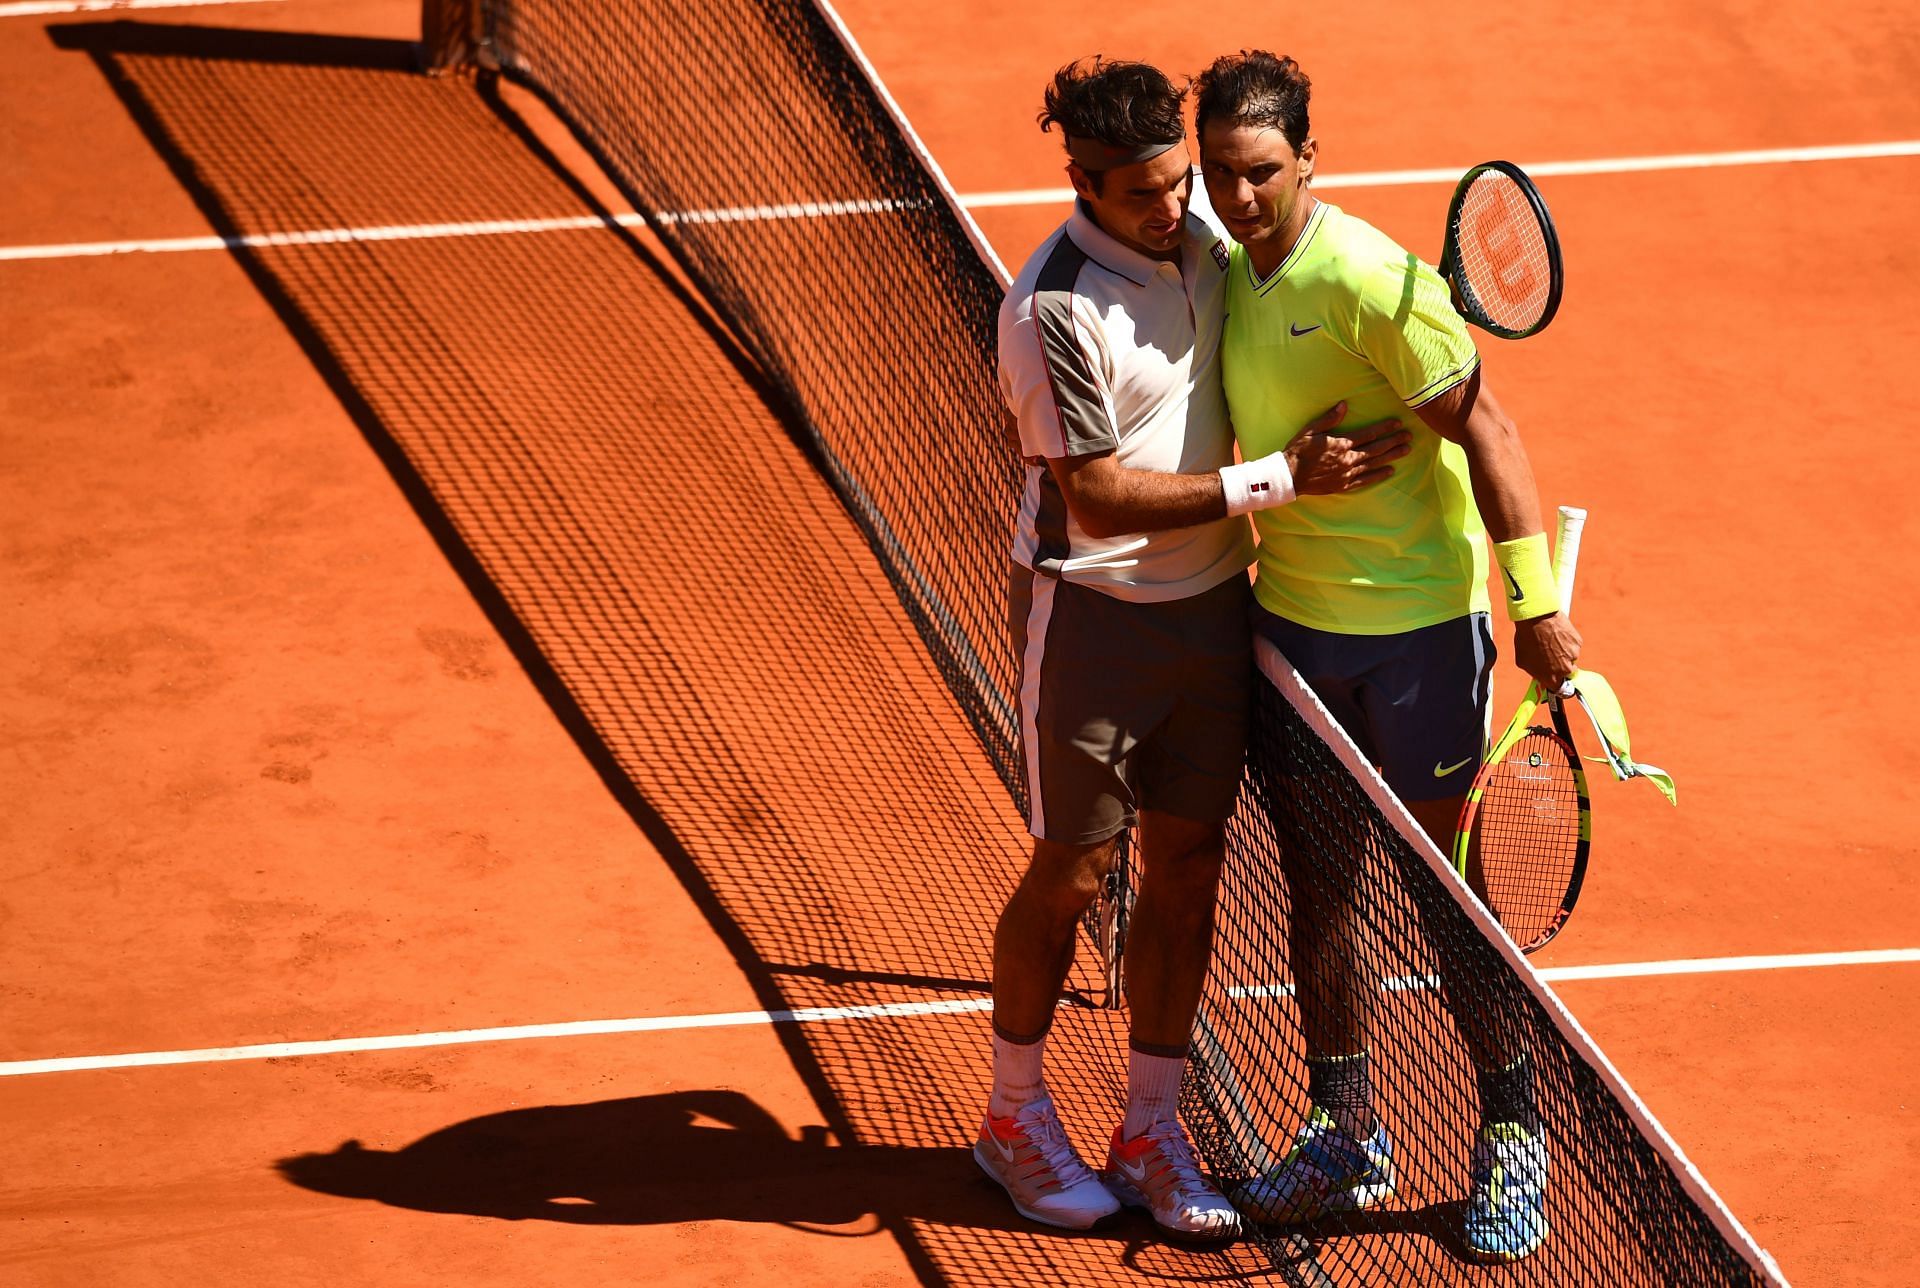 The Swiss legend and Rafael Nadal embrace after 2019 French Open SF clash